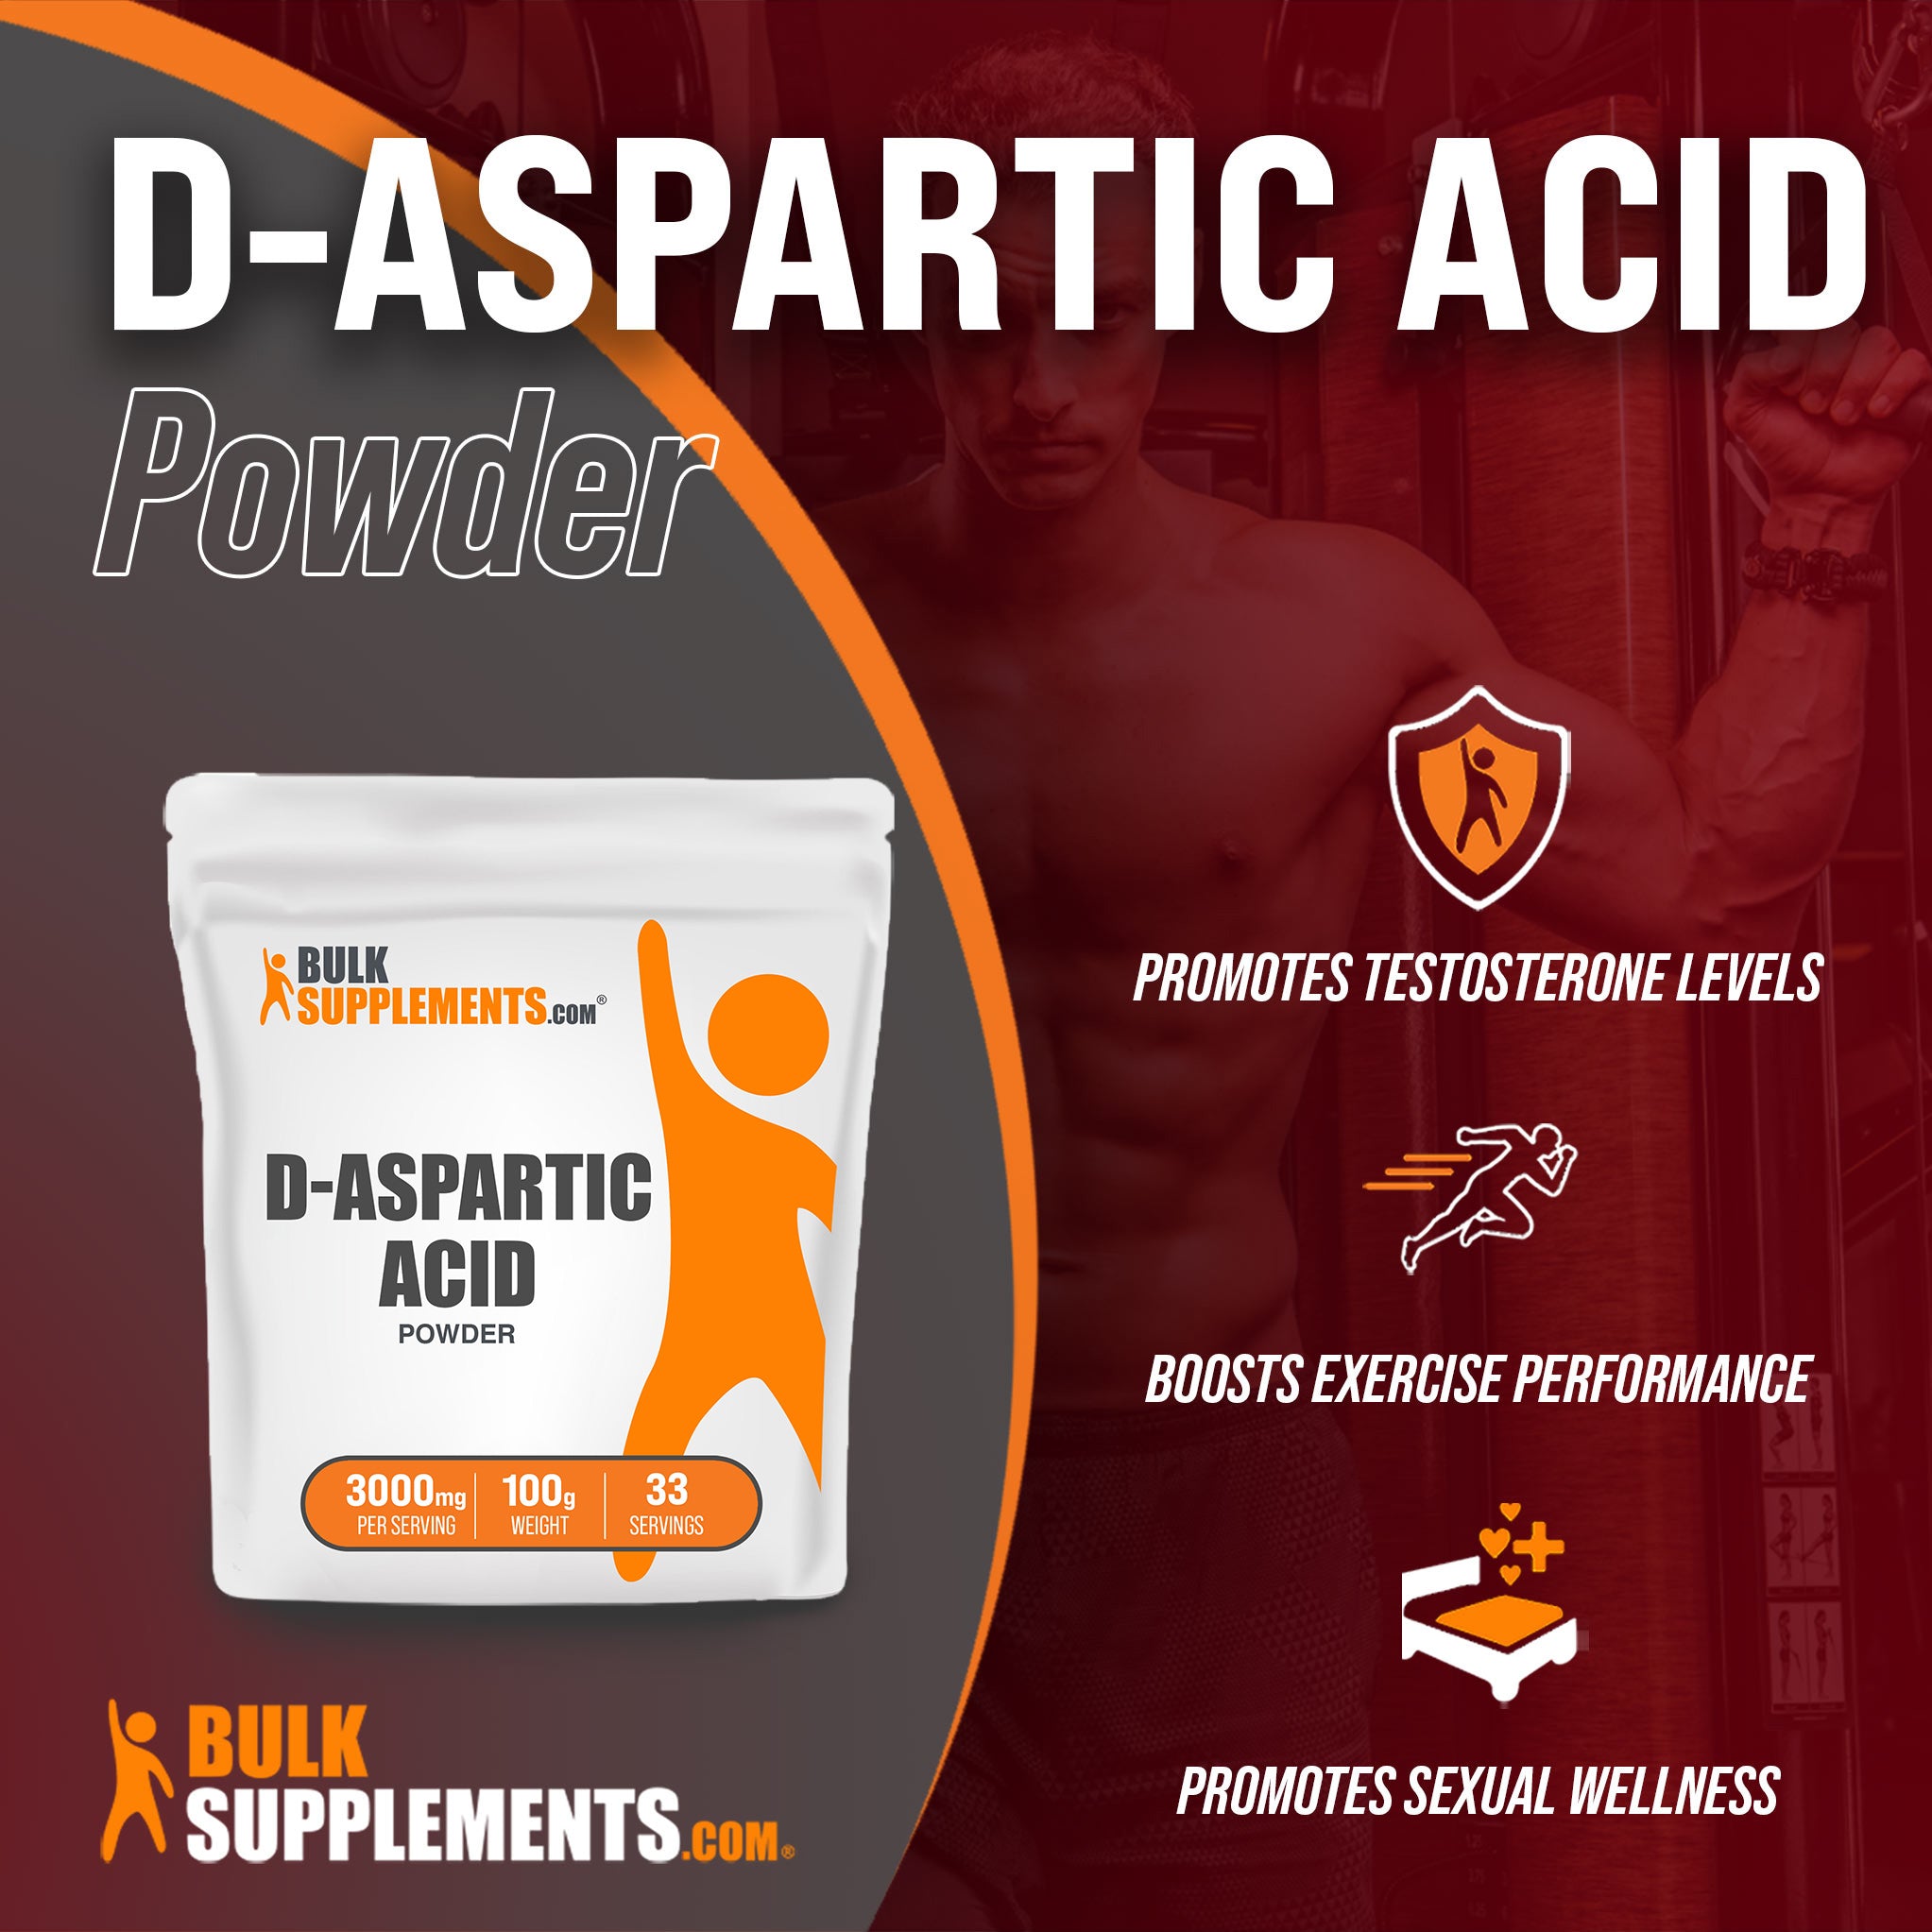 Benefits of D-Aspartic Acid; promotes testosterone levels, boosts exercise performance, promotes sexual wellness